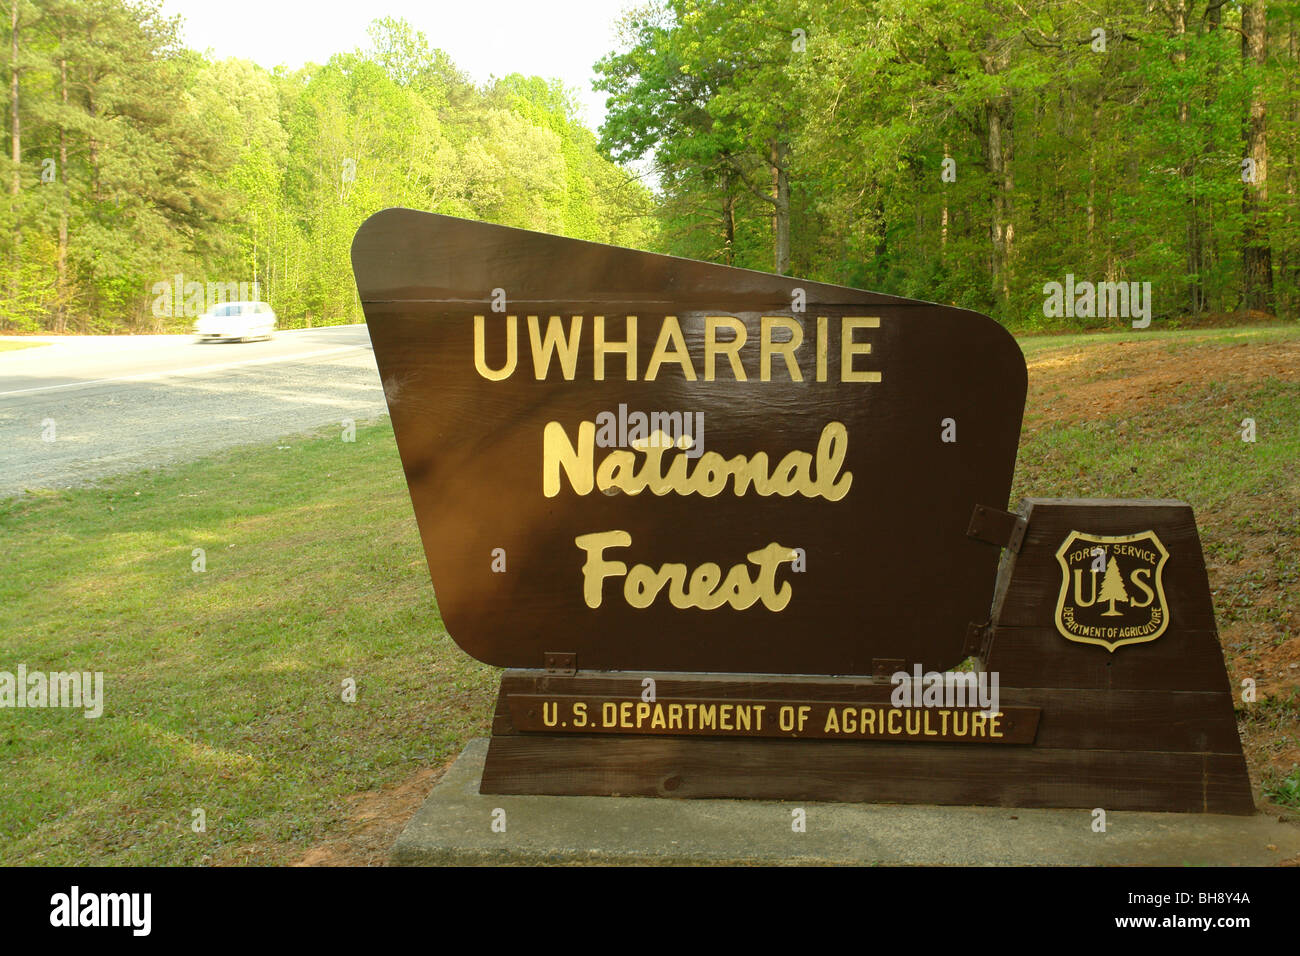 AJD64323, NC, North Carolina, Uwharrie National Forest, entrance sign Stock Photo